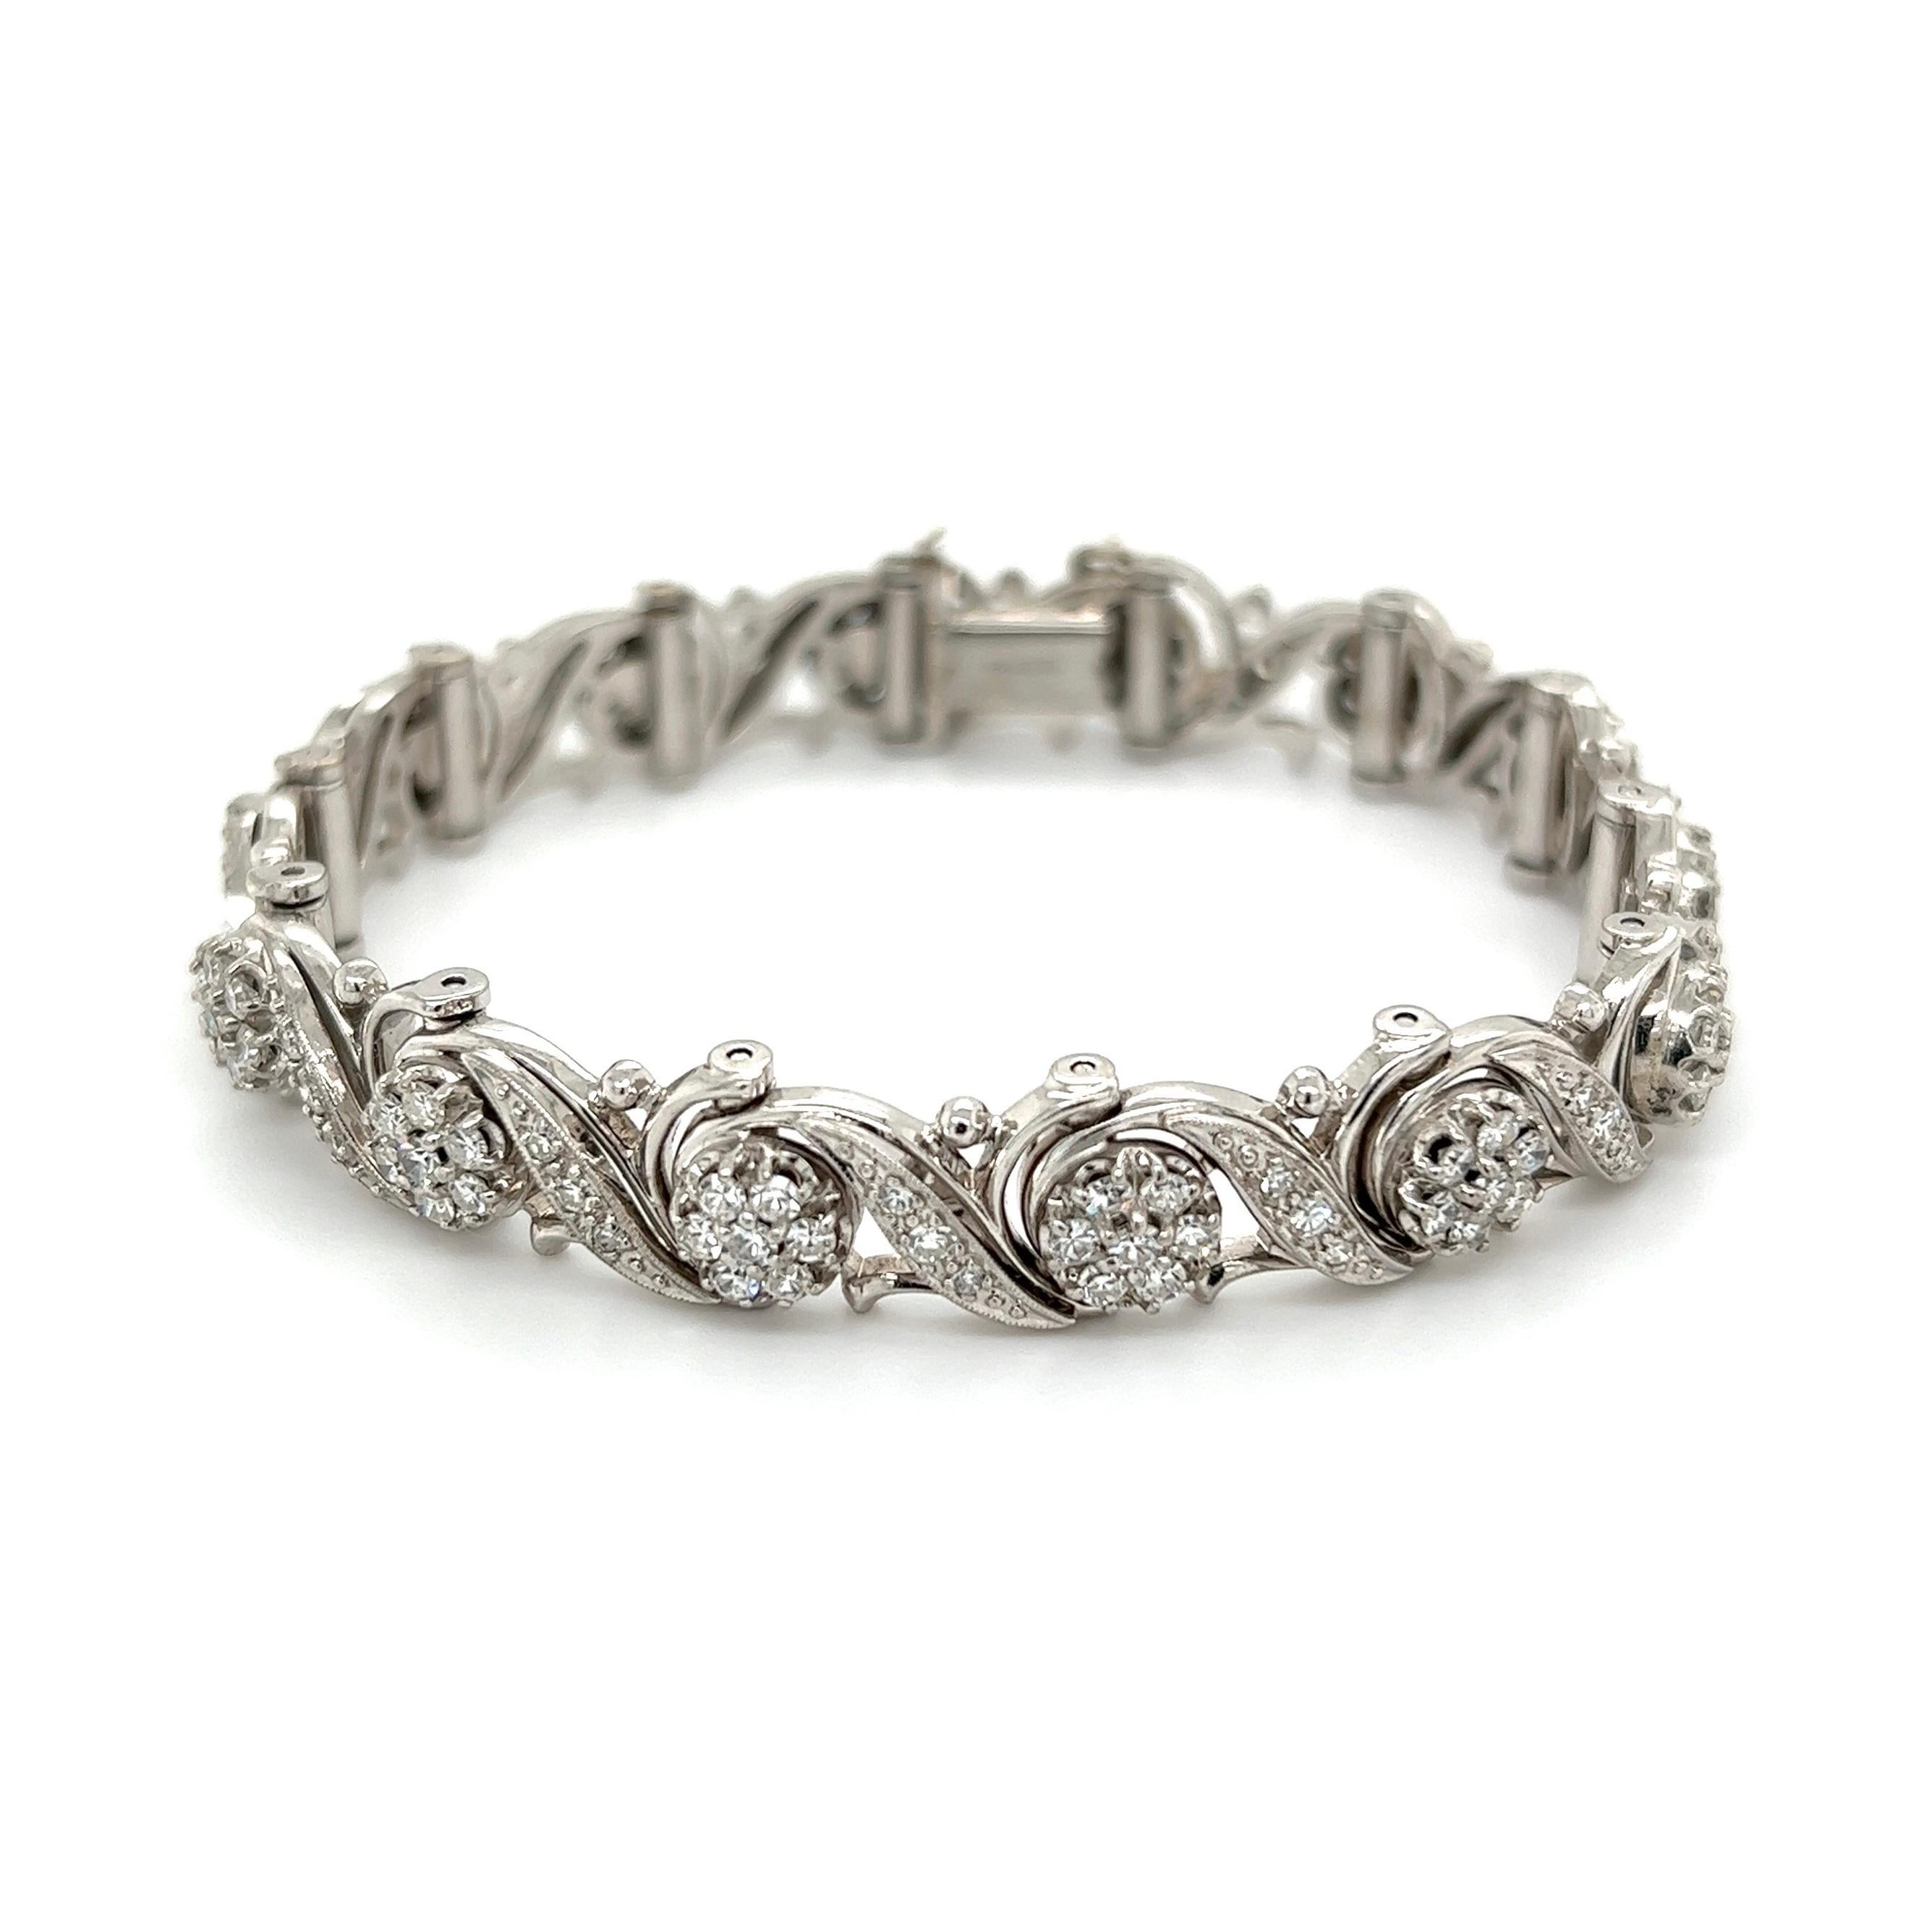 Simply Beautiful! Finely detailed Designer JABEL Diamond Gold Bracelet. Hand set with 140 Single Cut Diamonds weighing approx. 4.20tcw. Hand crafted 18K White Gold. Measuring approx. 6.5” long x 0.40” wide. The Bracelet is in excellent condition and